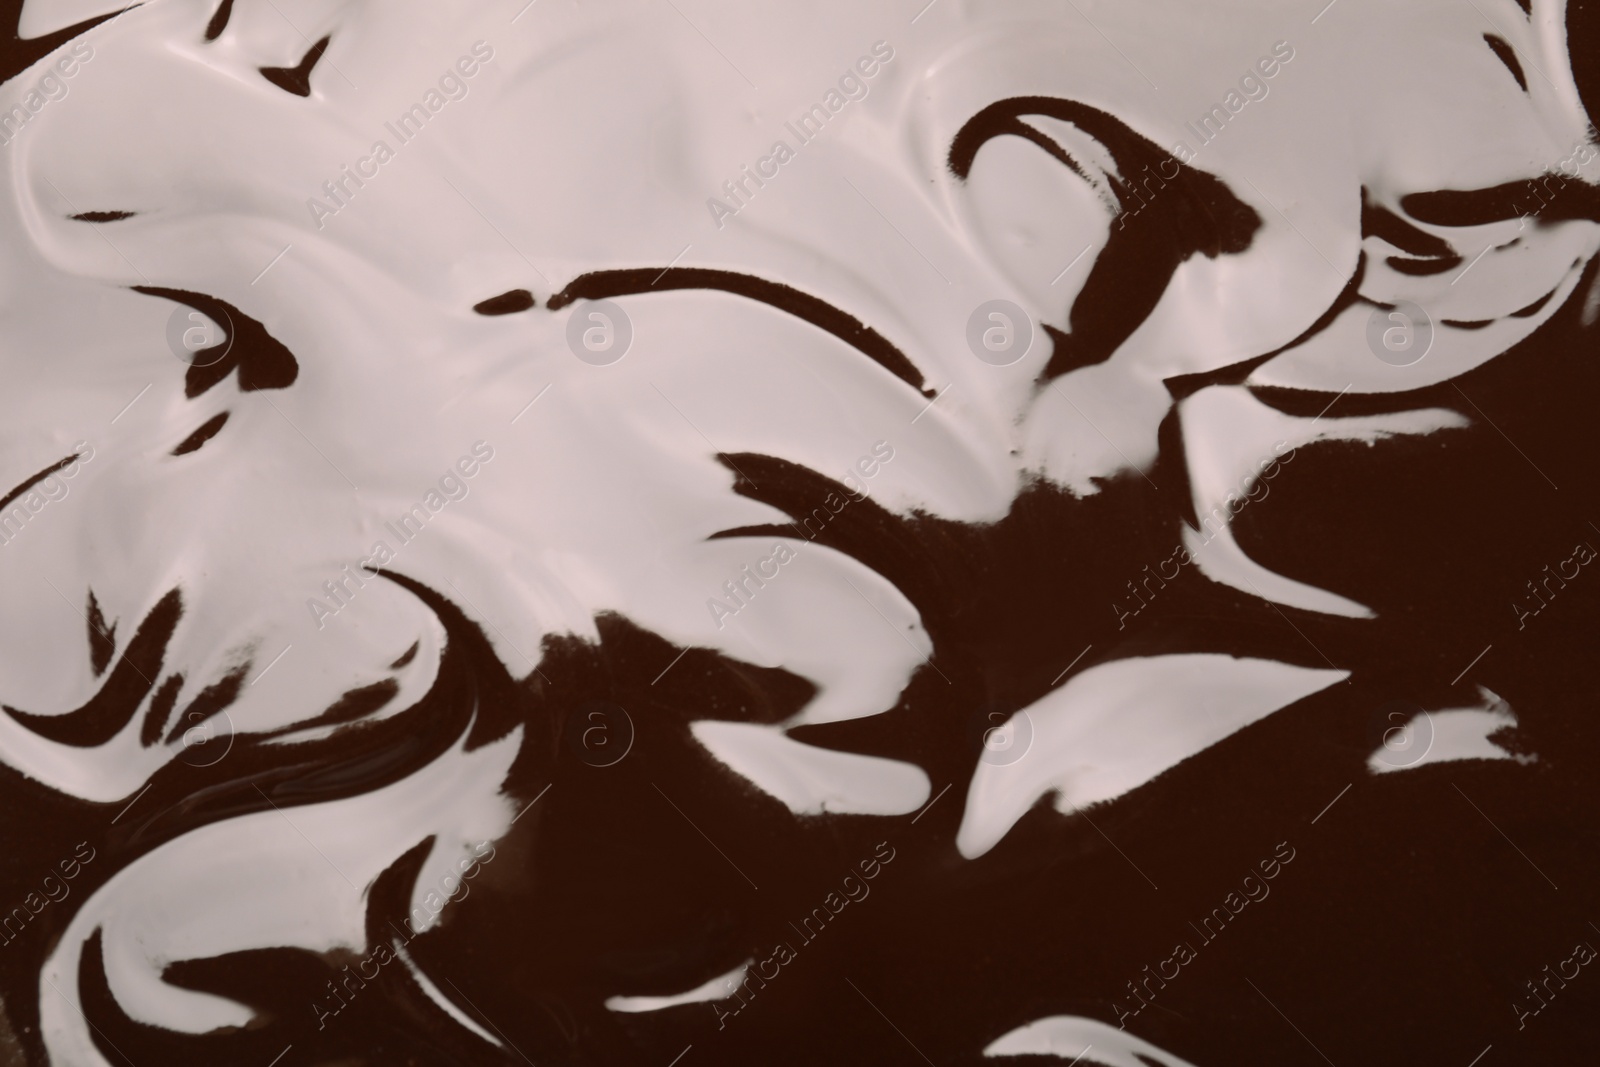 Photo of Delicious chocolate cream as background, closeup view